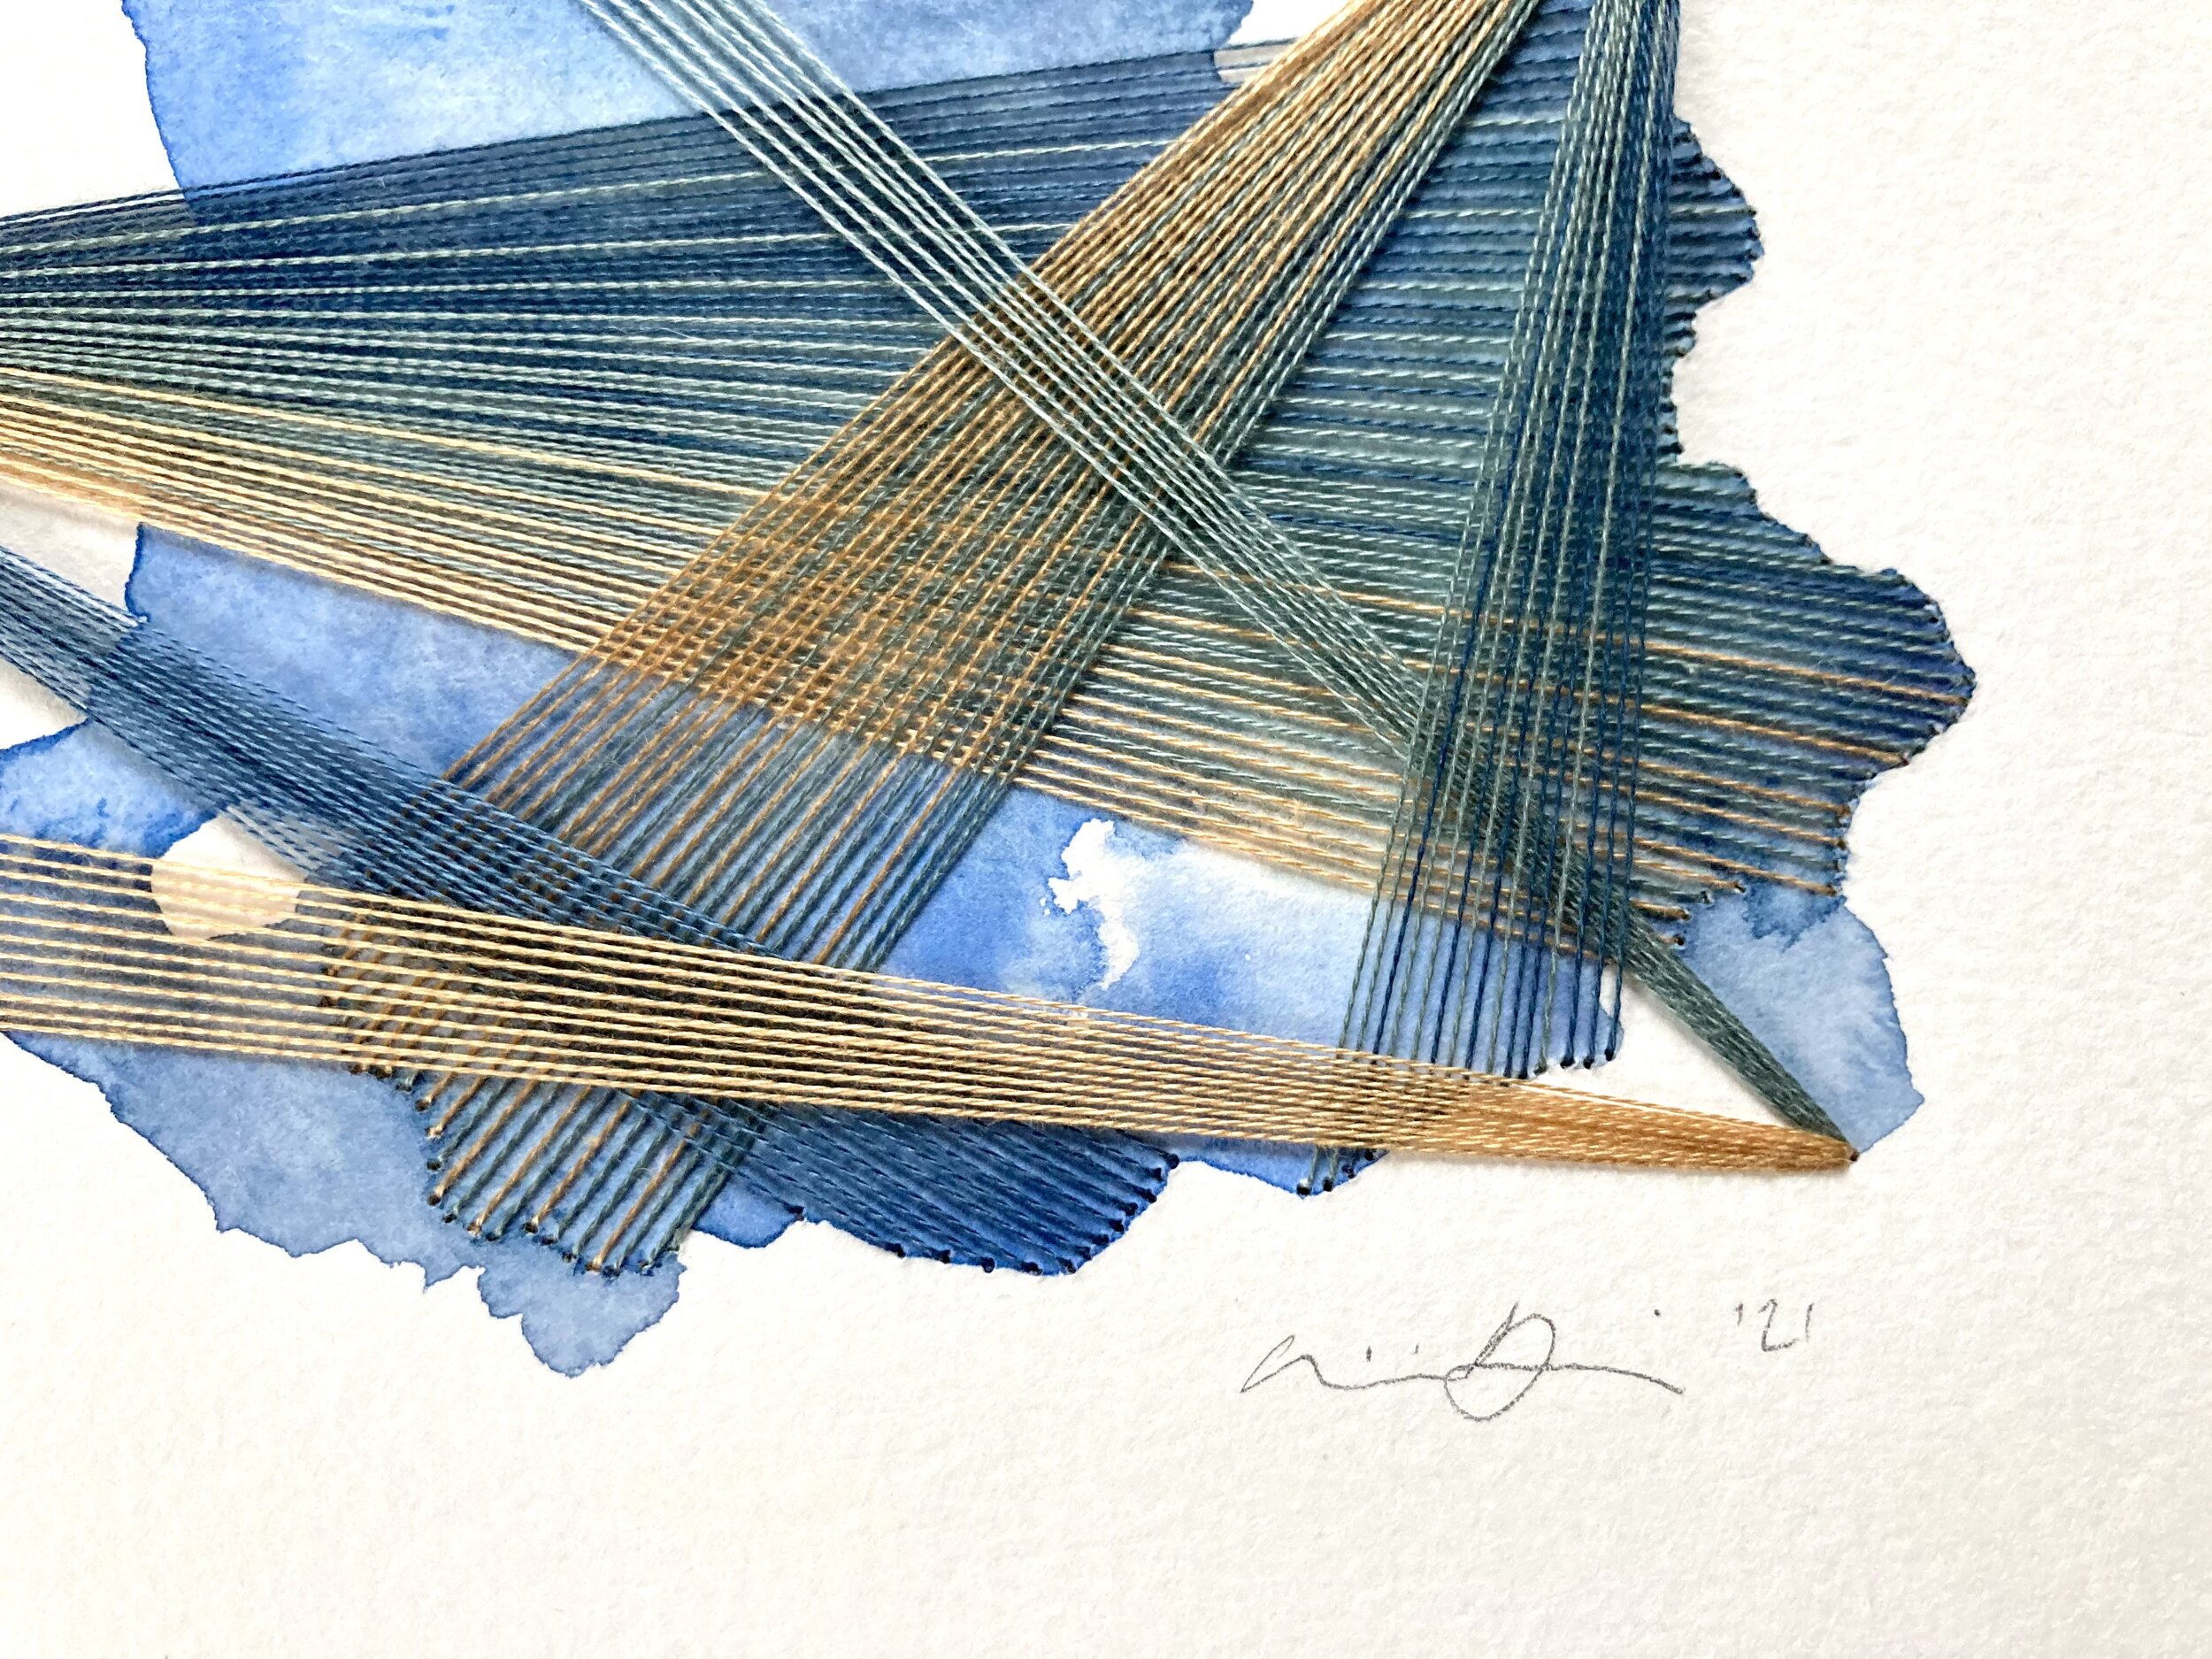 Watercolor and Embroidery in Blue Heron--detail 3